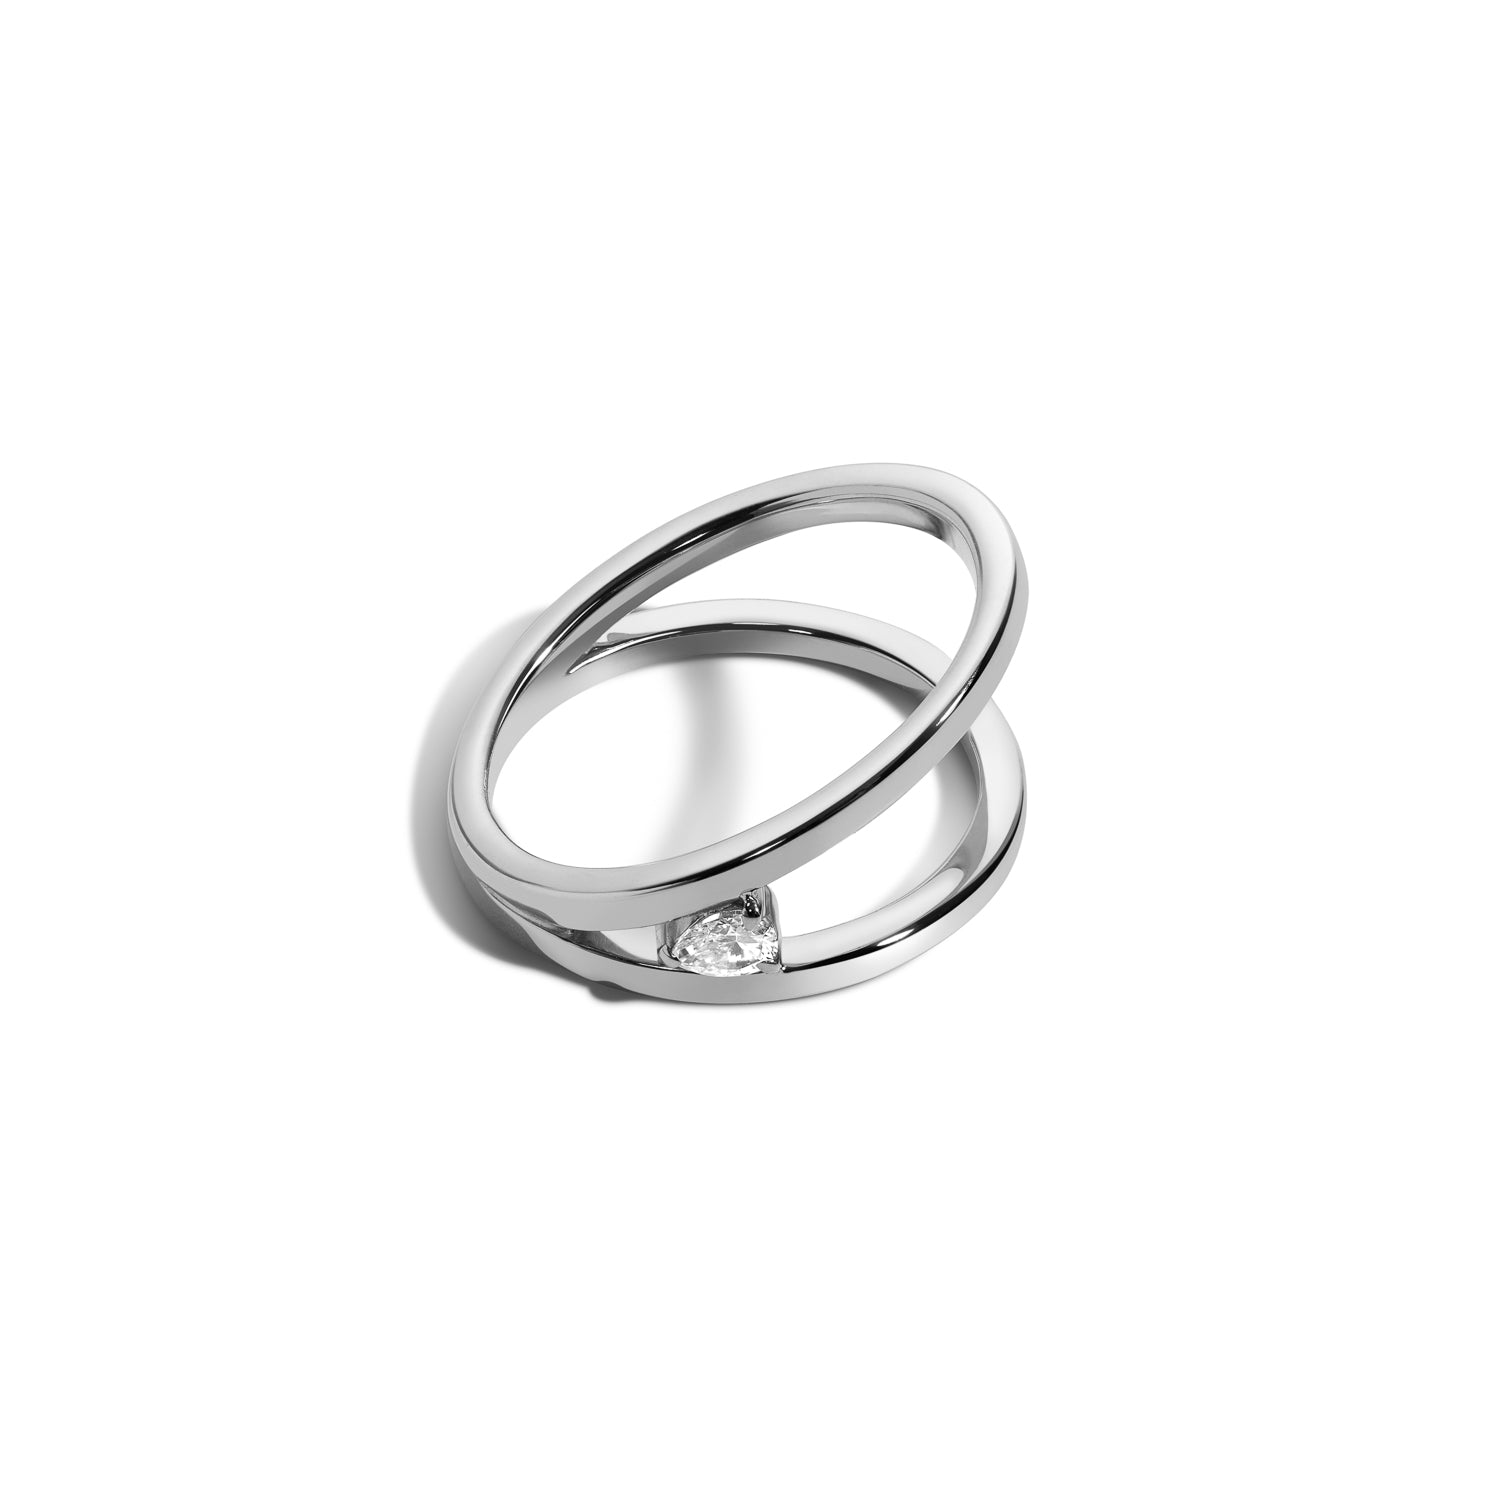 Shahla Karimi Jewelry Love V Ring with Pear 14K White Gold